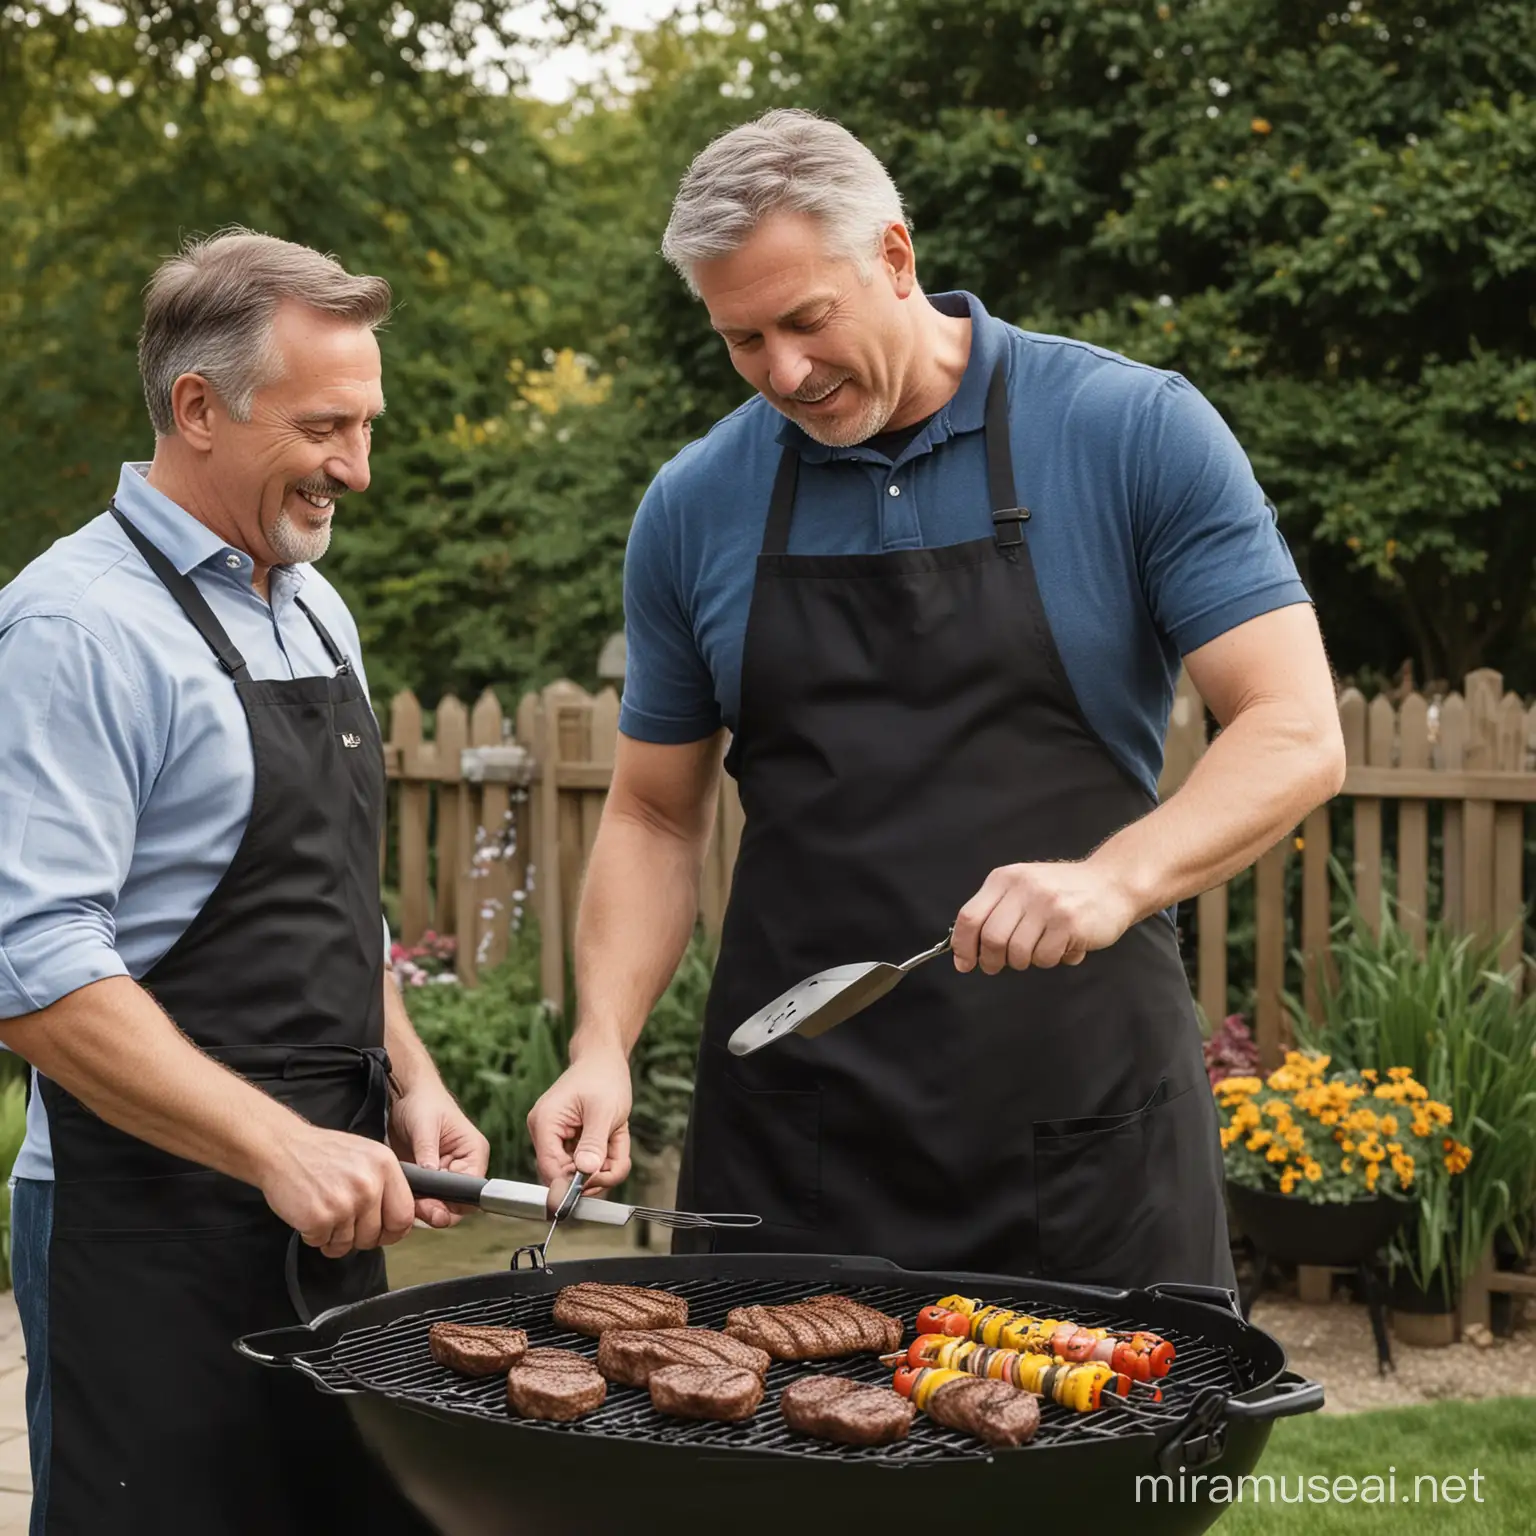 2 person pictura, 60 years old dad and young son grilling toguether, using a black apron, and a black watch,